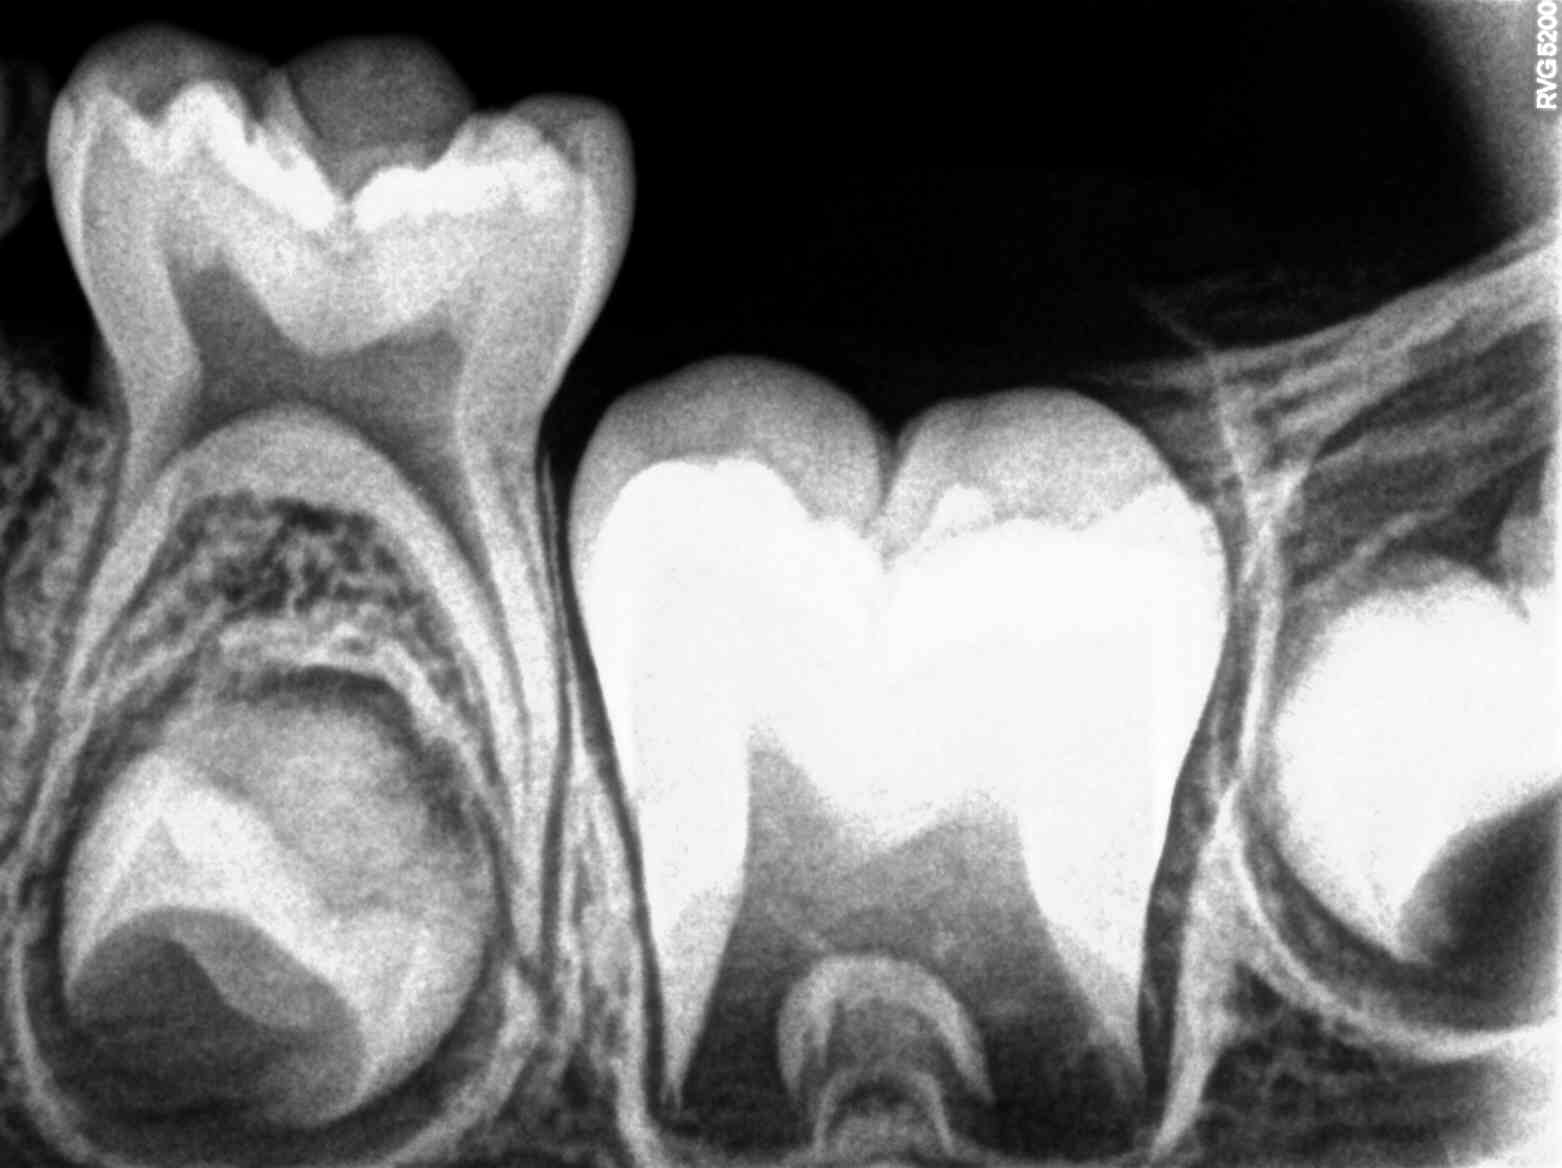 Intraoral Periapical Radiograph (IOPA) of a boy aged 5 years showing primary tooth #75 and developing crowns of permanent teeth 35, 36 and 37. Note the eruption path for 36 has been completed. The 36 is now in the post-emergence eruption stage.